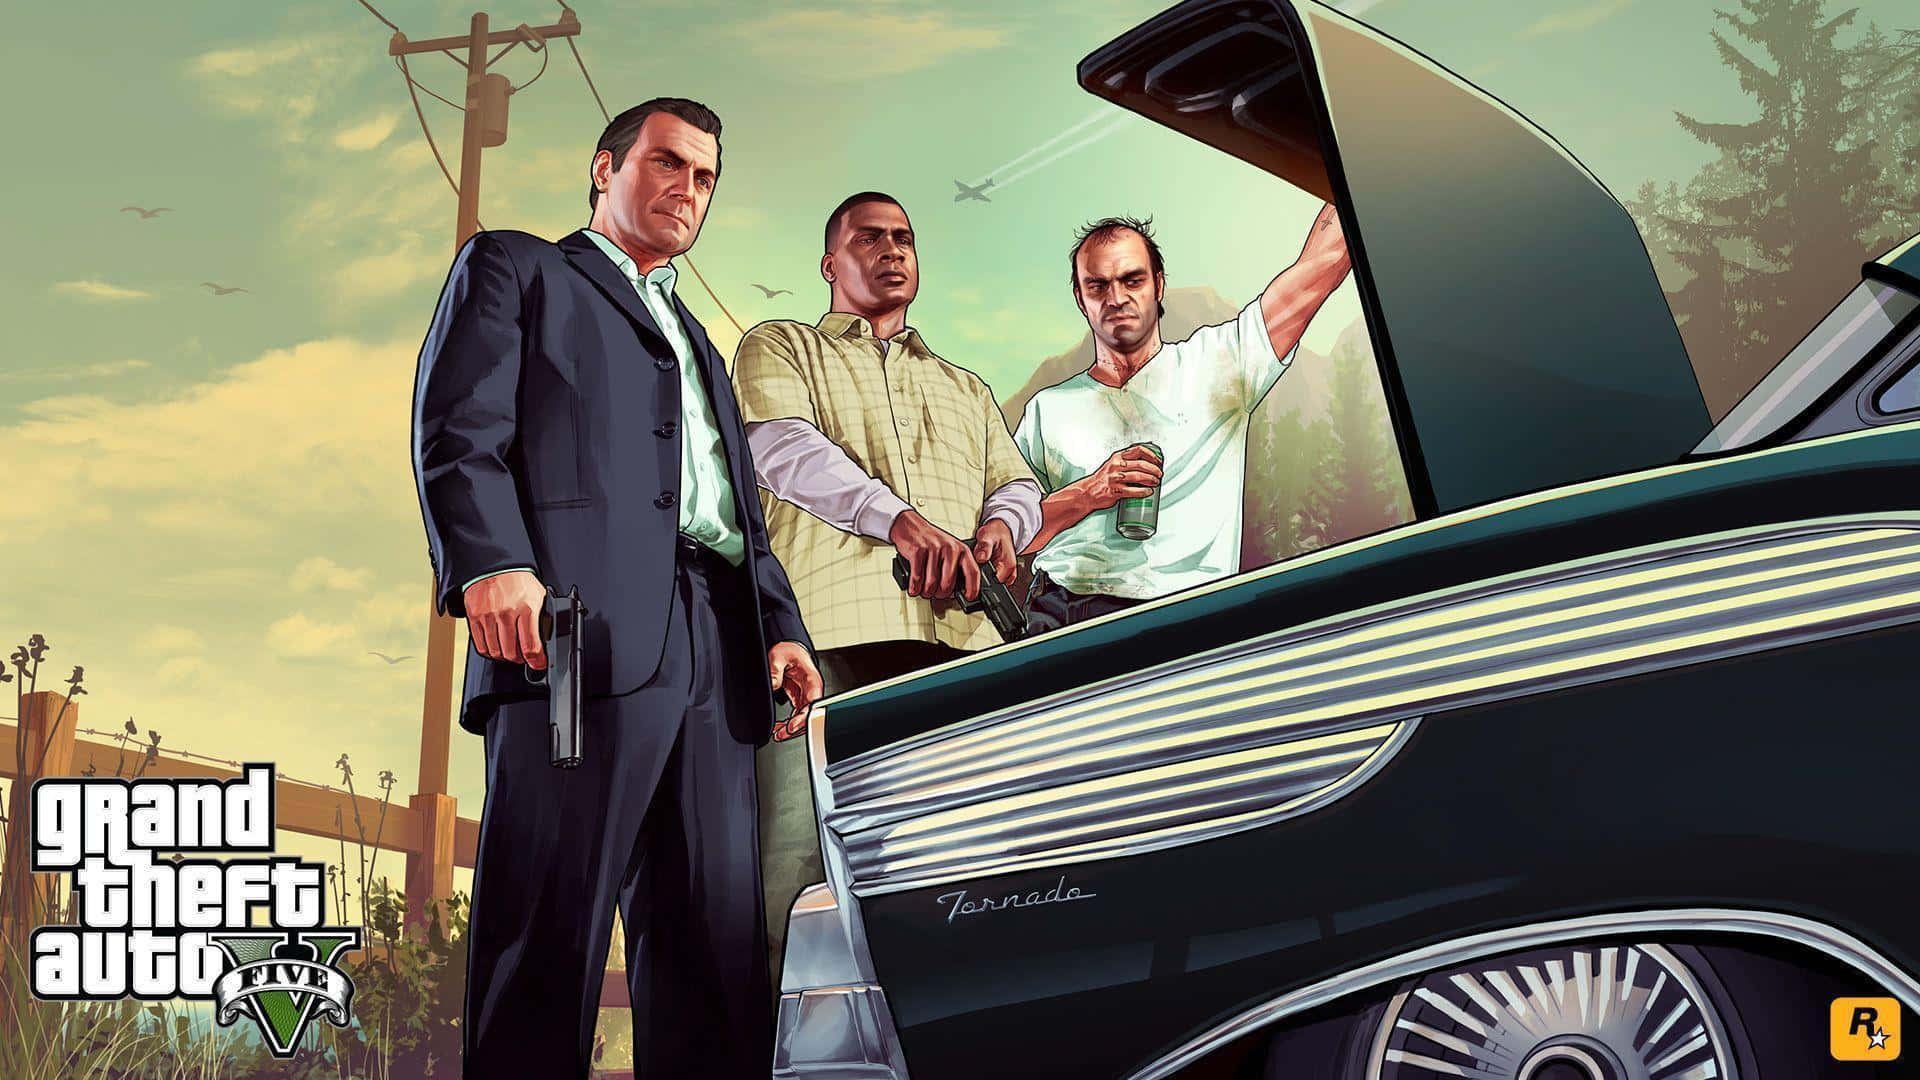 Get Into The Action With Grand Theft Auto V